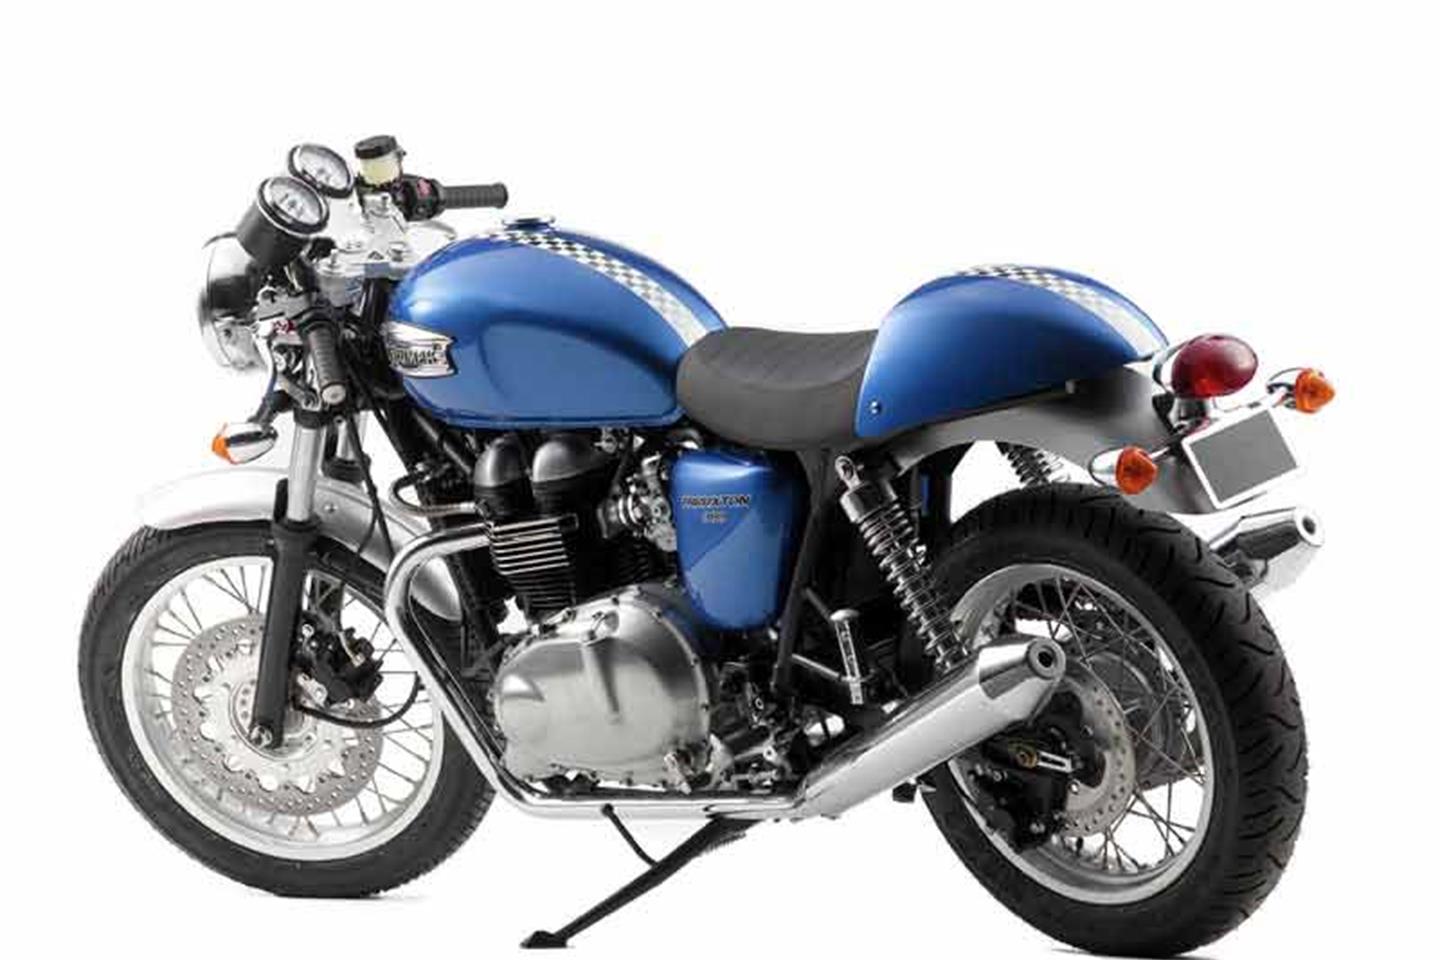 Triumph Thruxton 900 (2003-2018) review and used buying guide | MCN